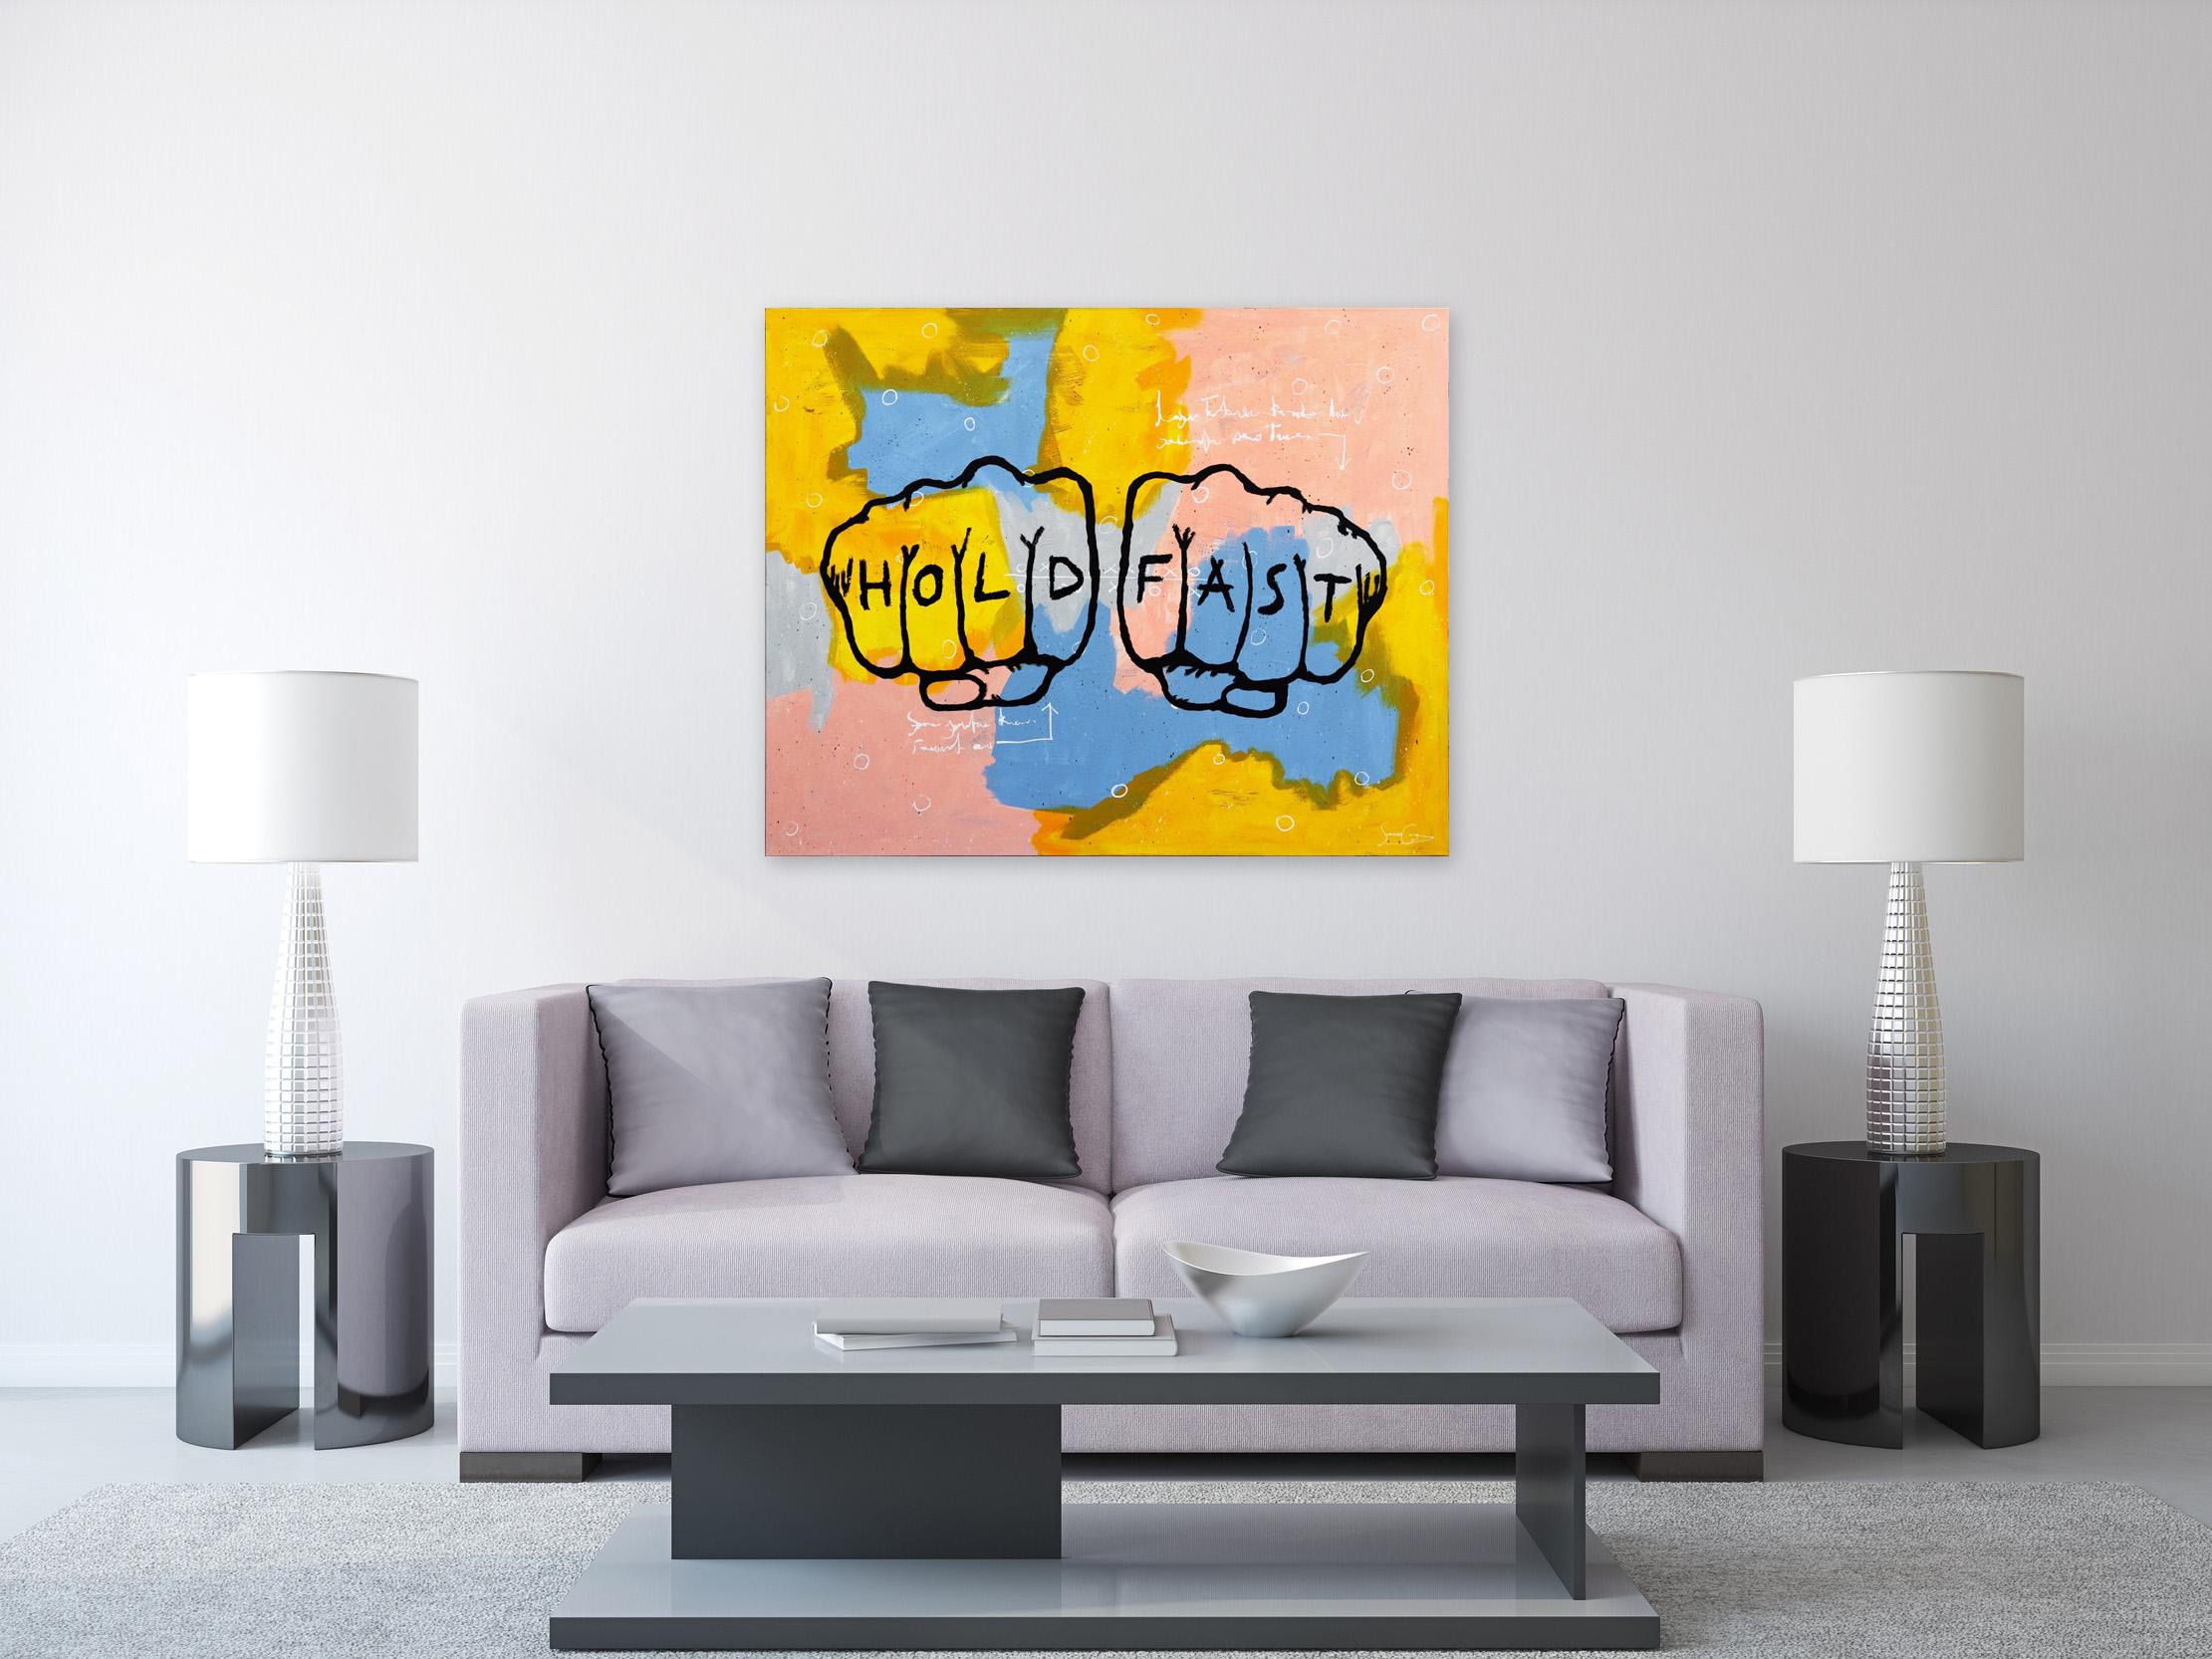 Hold Fast XL - Large Original Painting on Canvas - Ready to Hang - Orange Figurative Painting by Soren Grau